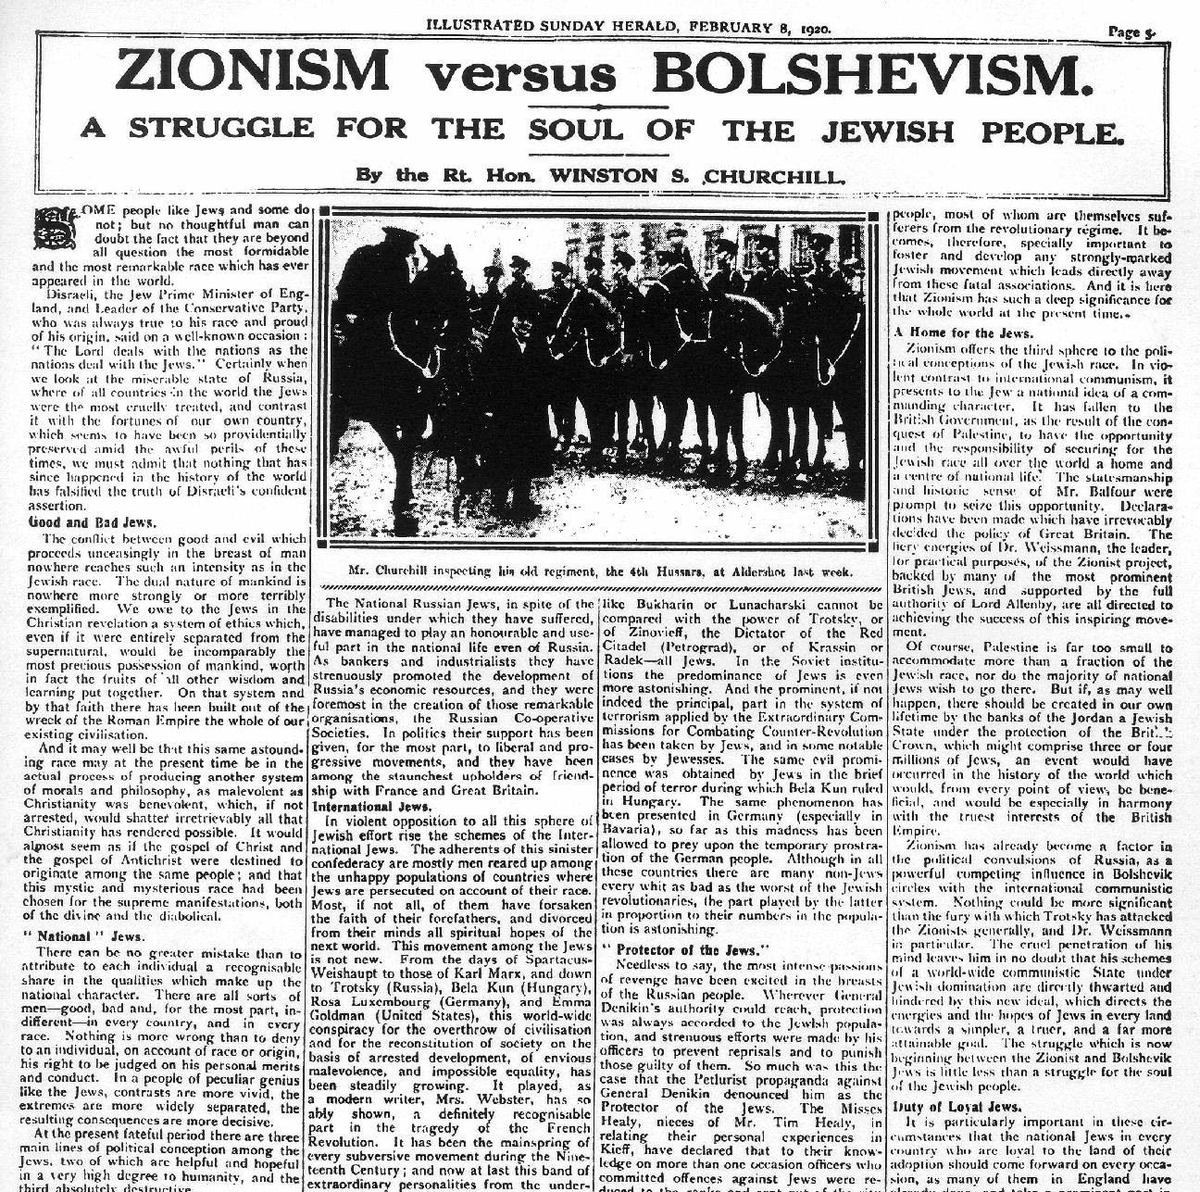 11. "Zionism vs. Bolshevism. A Struggle For The Soul Of The Jewish People." -Winston ChurchillHigh-Res link:  https://files.catbox.moe/3cxuas.jpg 